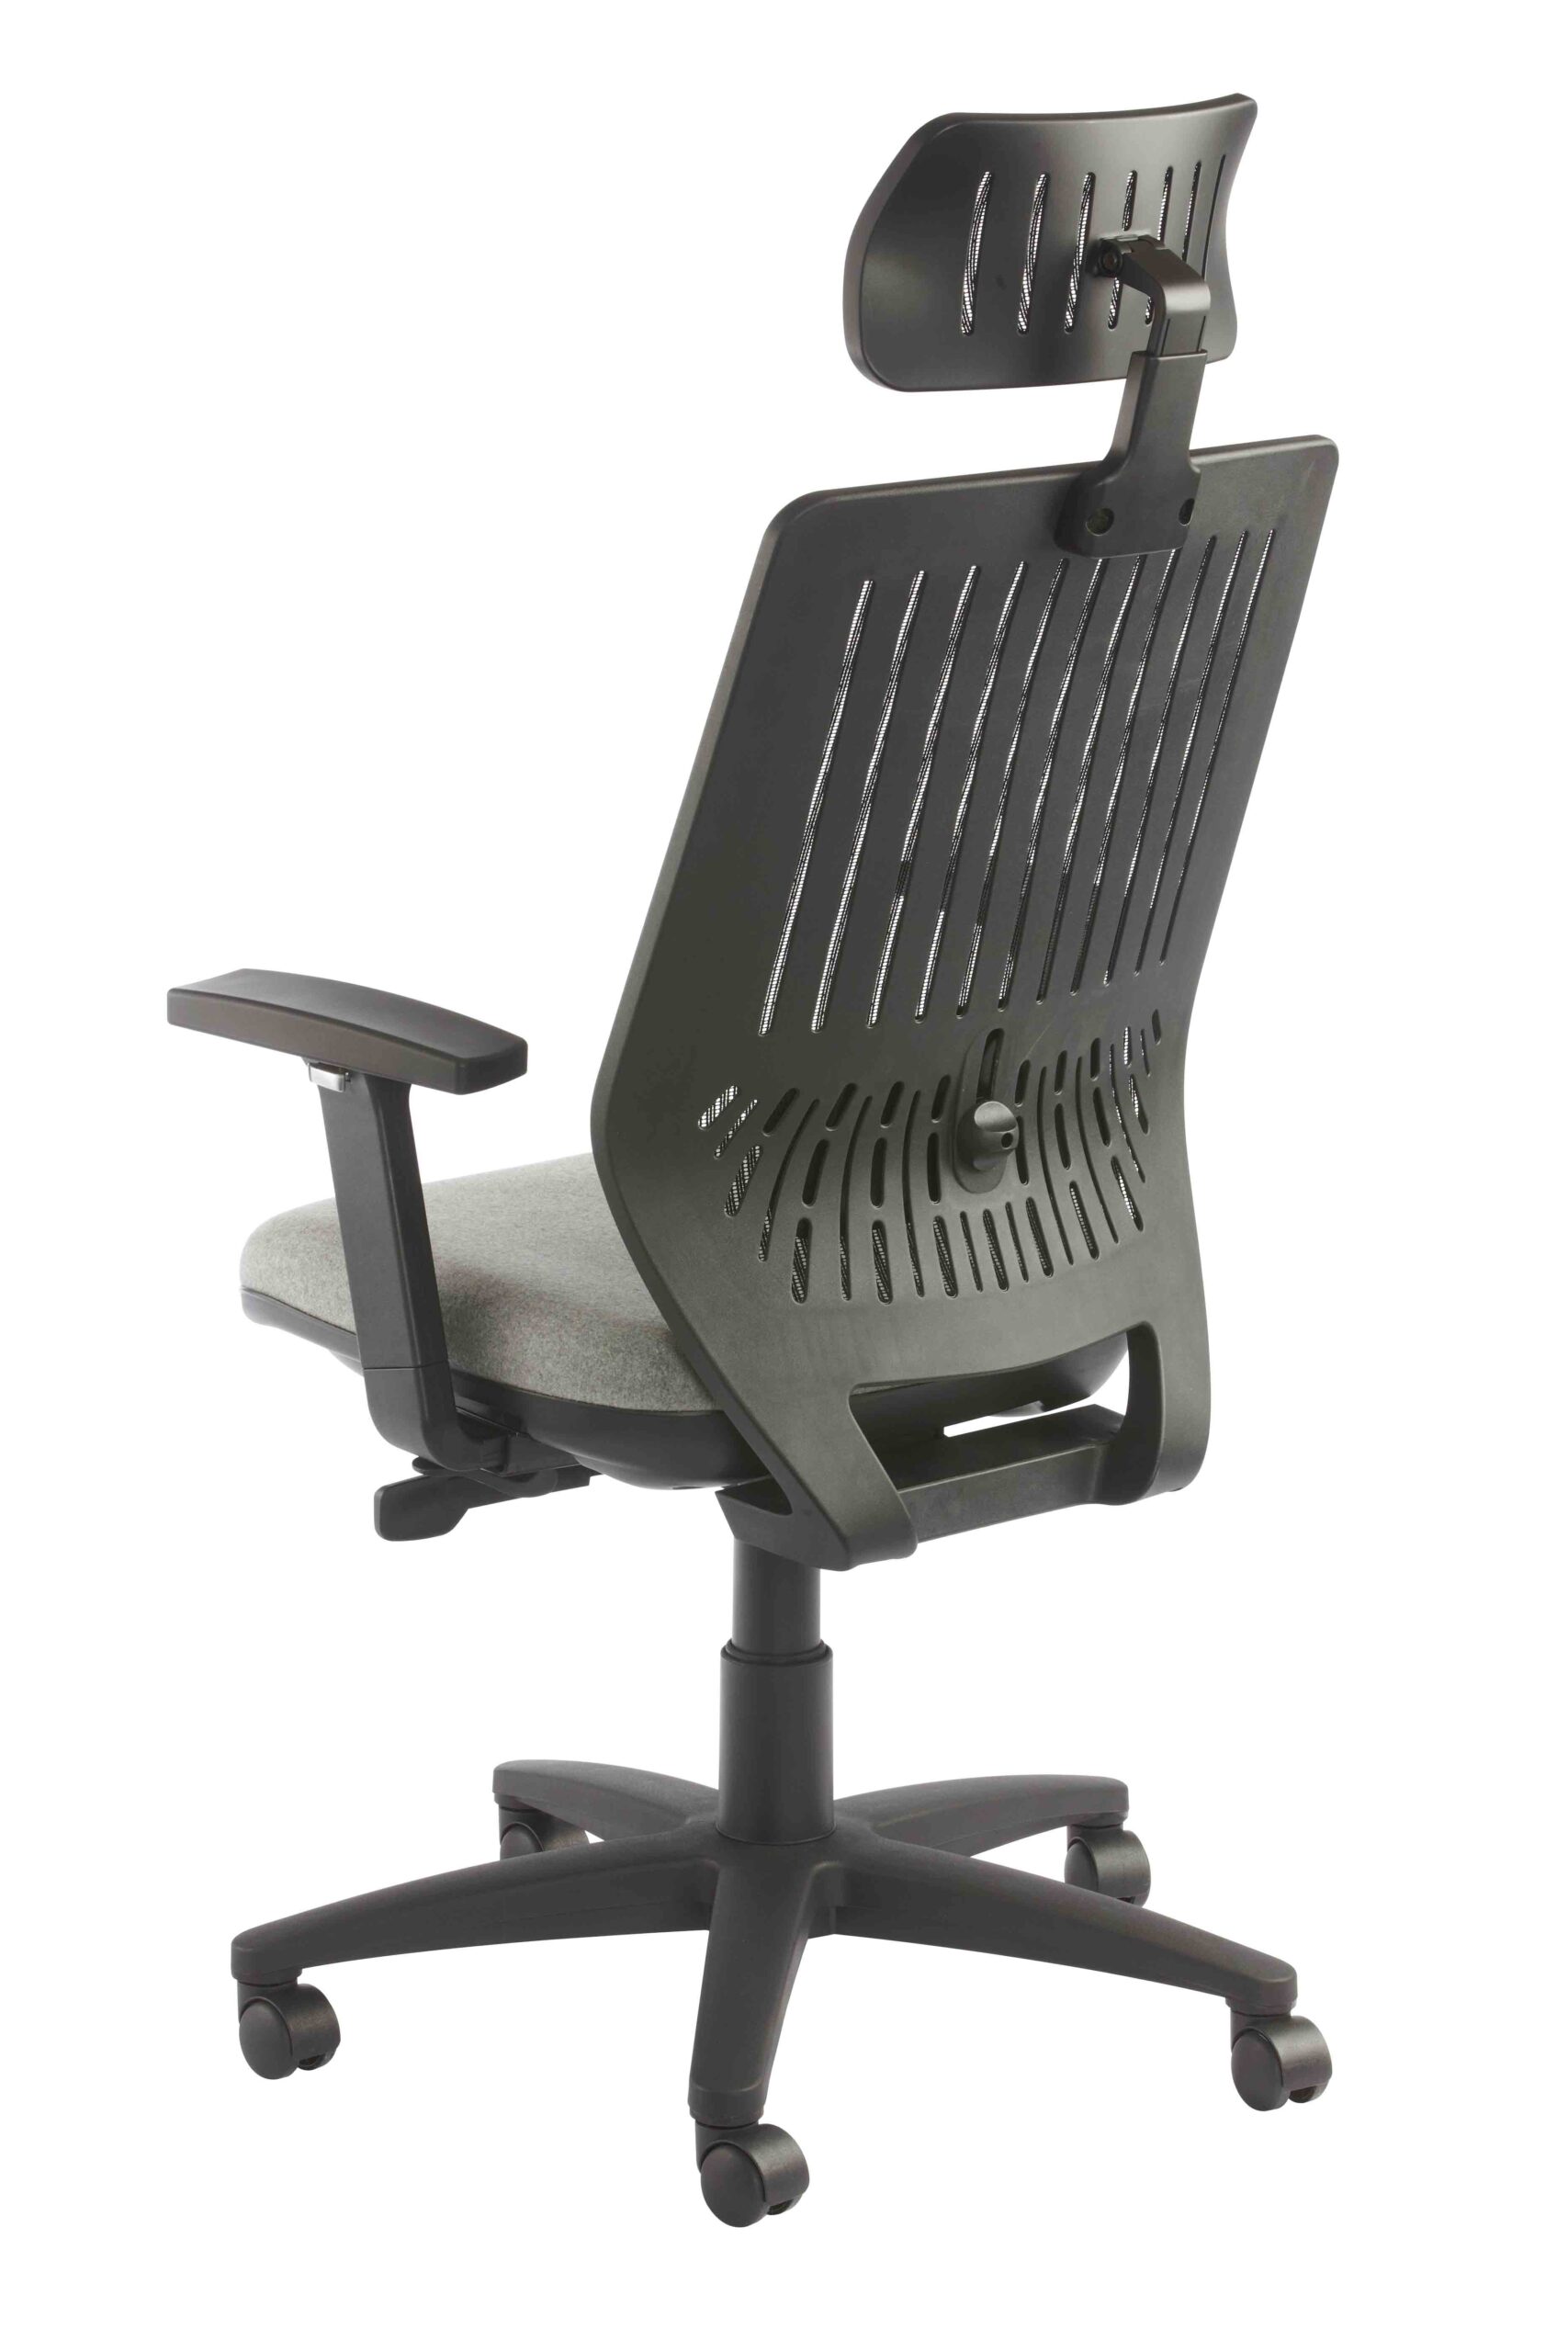 Nightingale_Bless_2100_with_headrest_back_Mikmaq_Office_Furniture-scaled-1.jpg